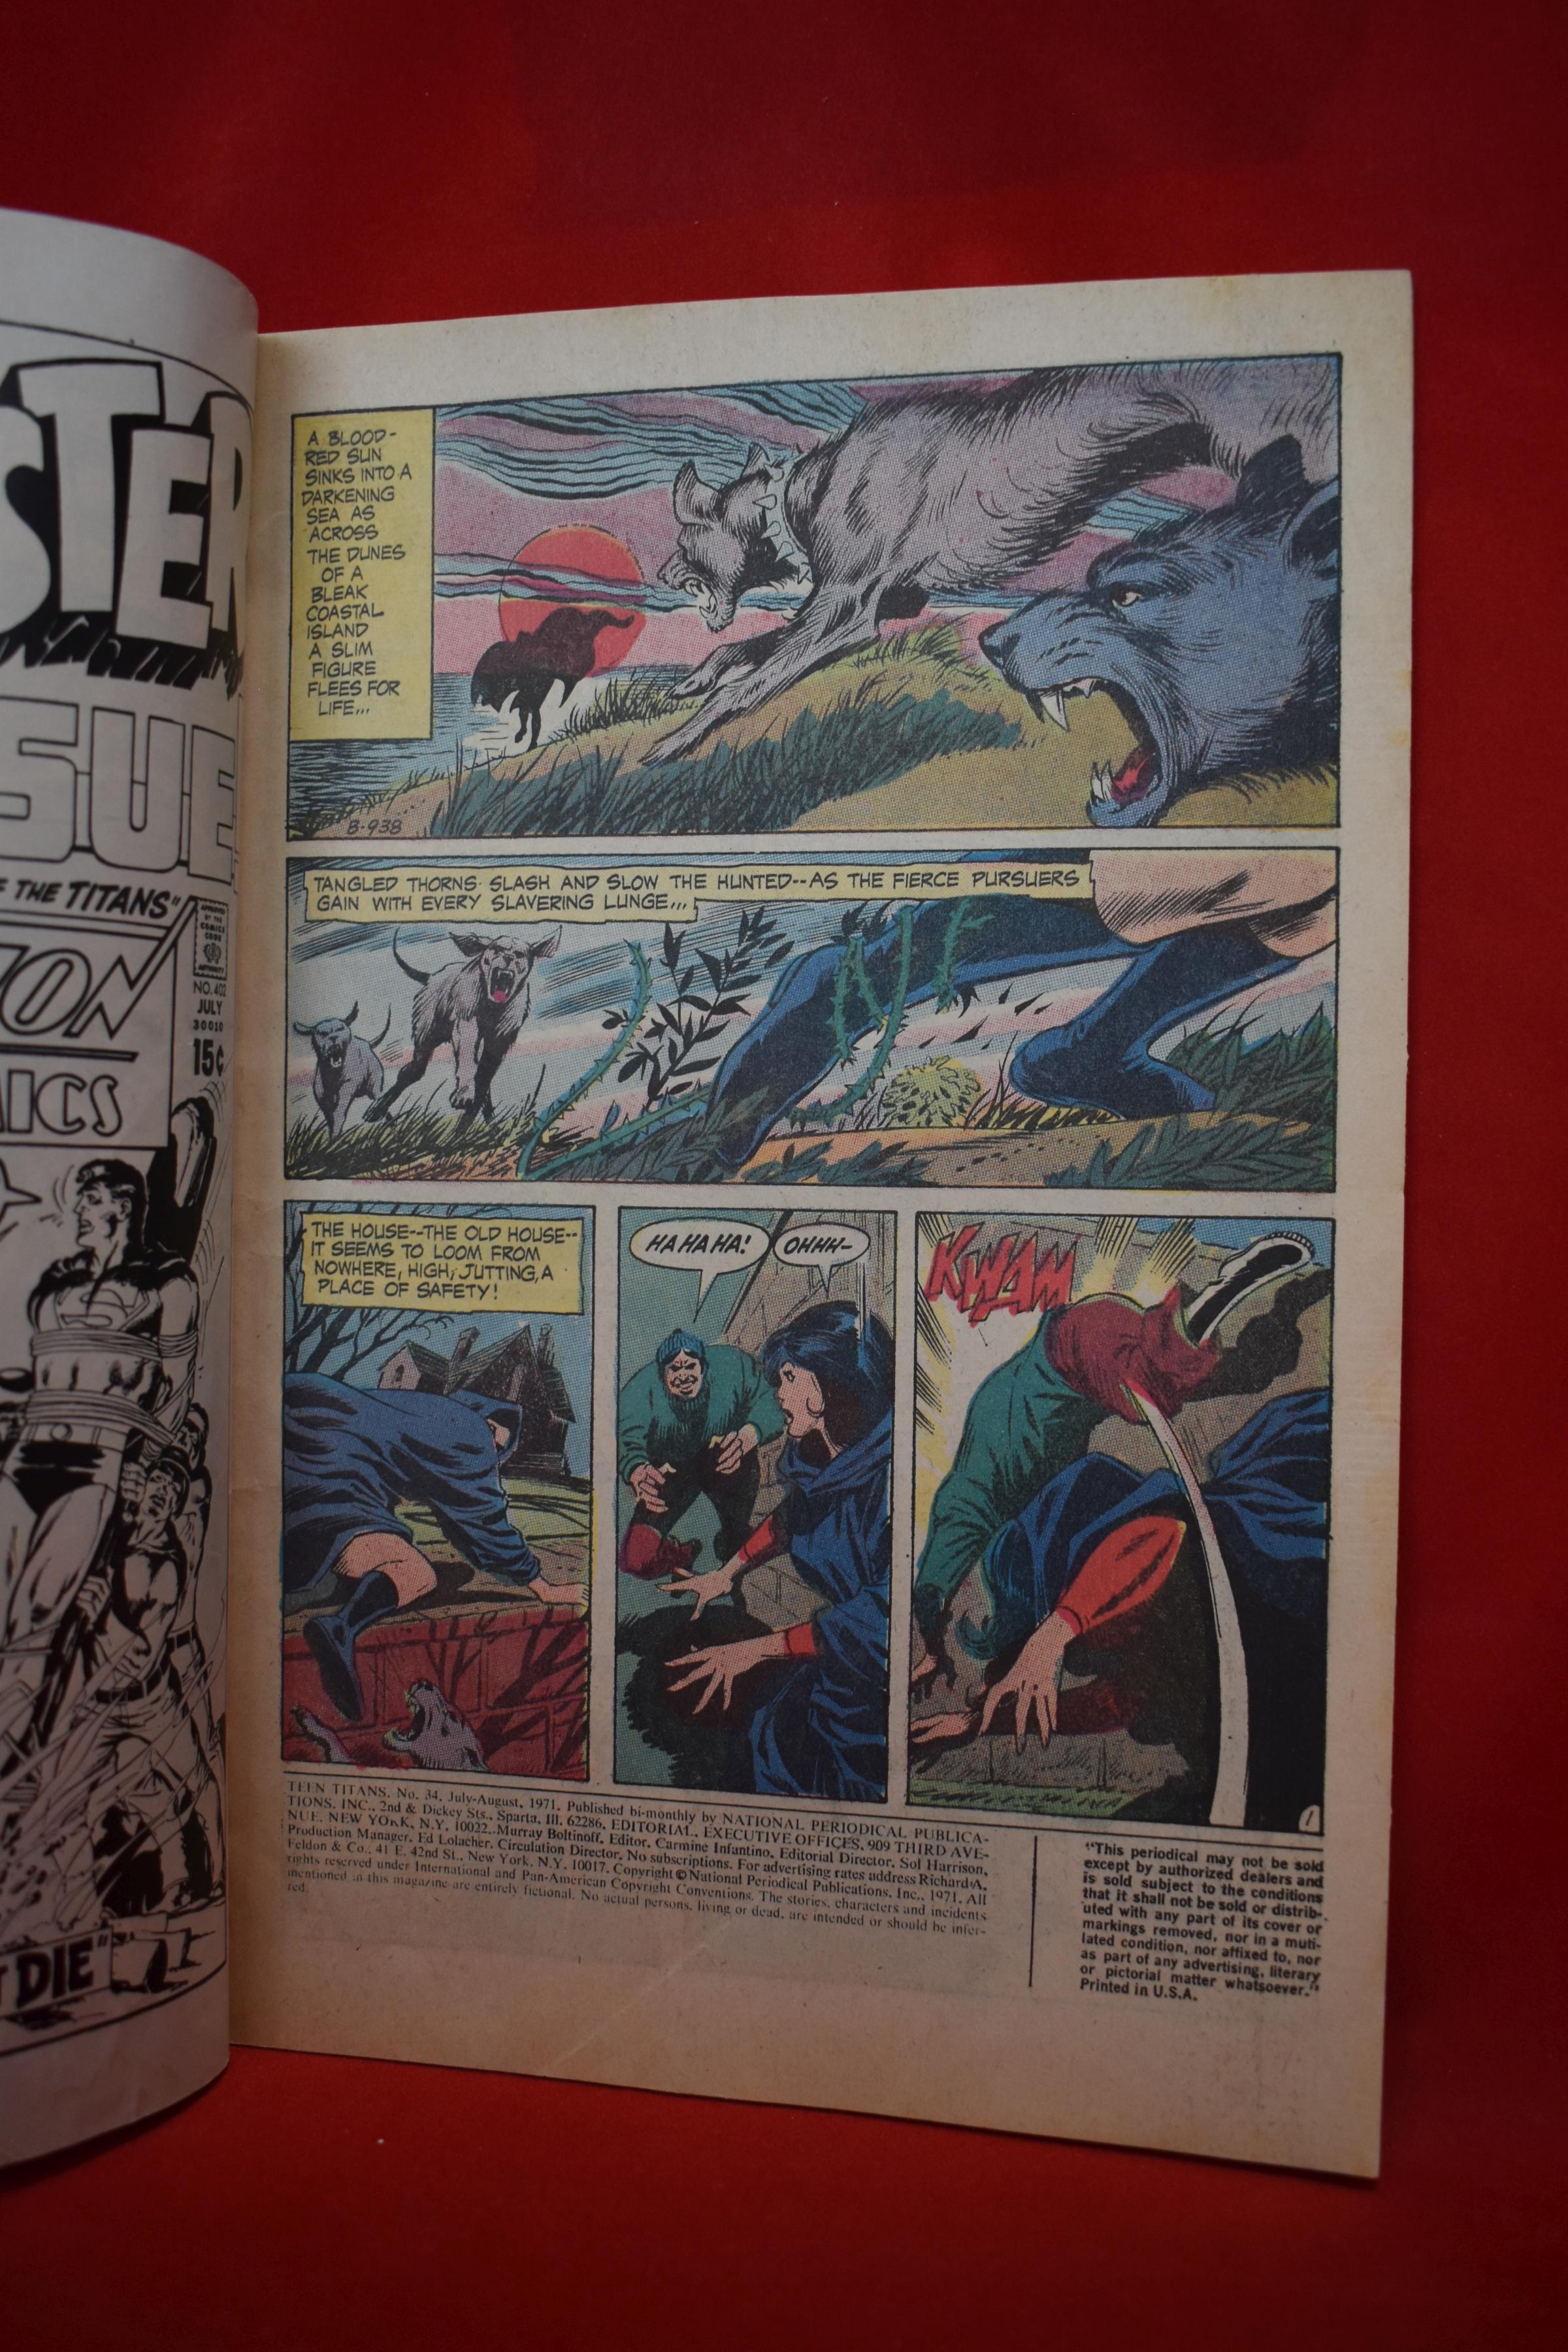 TEEN TITANS #34 | THE DEMON OF DOG ISLAND! | NICK CARDY - 1971 | *SOLID - BIT OF CREASING*